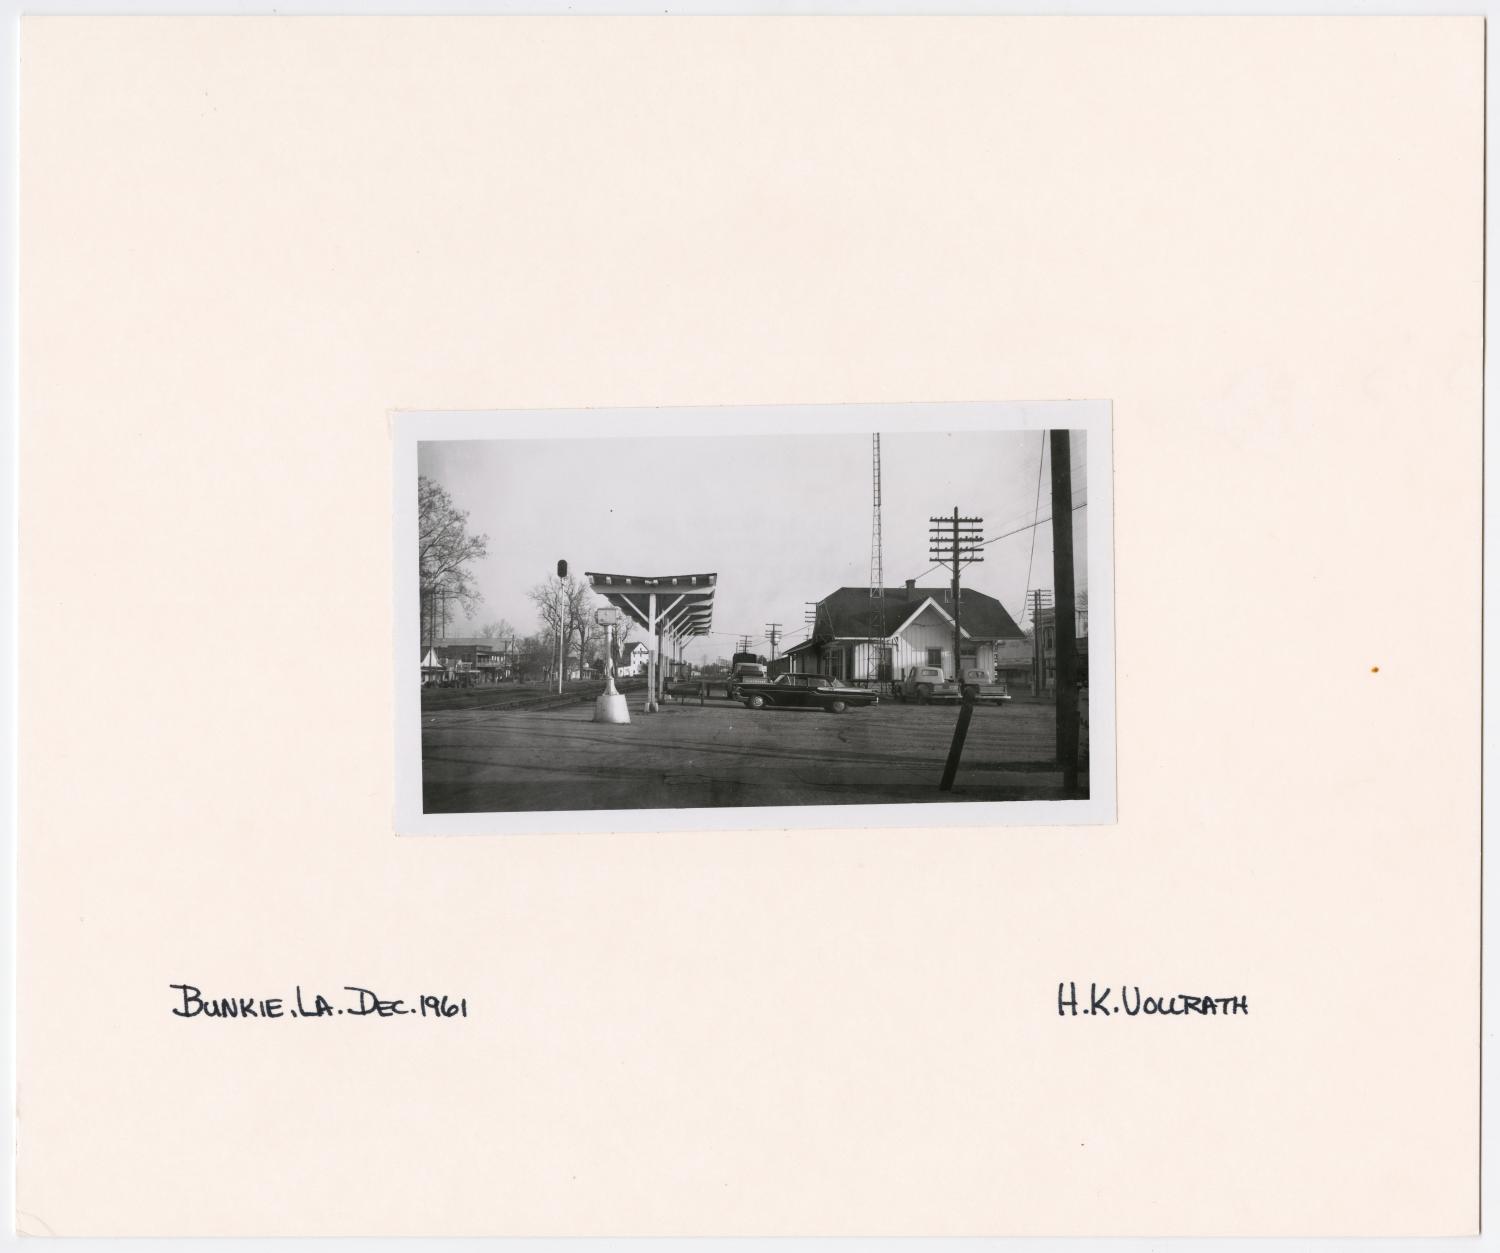 Images of Texas & Pacific Stations and Structures in Bunkie, LA